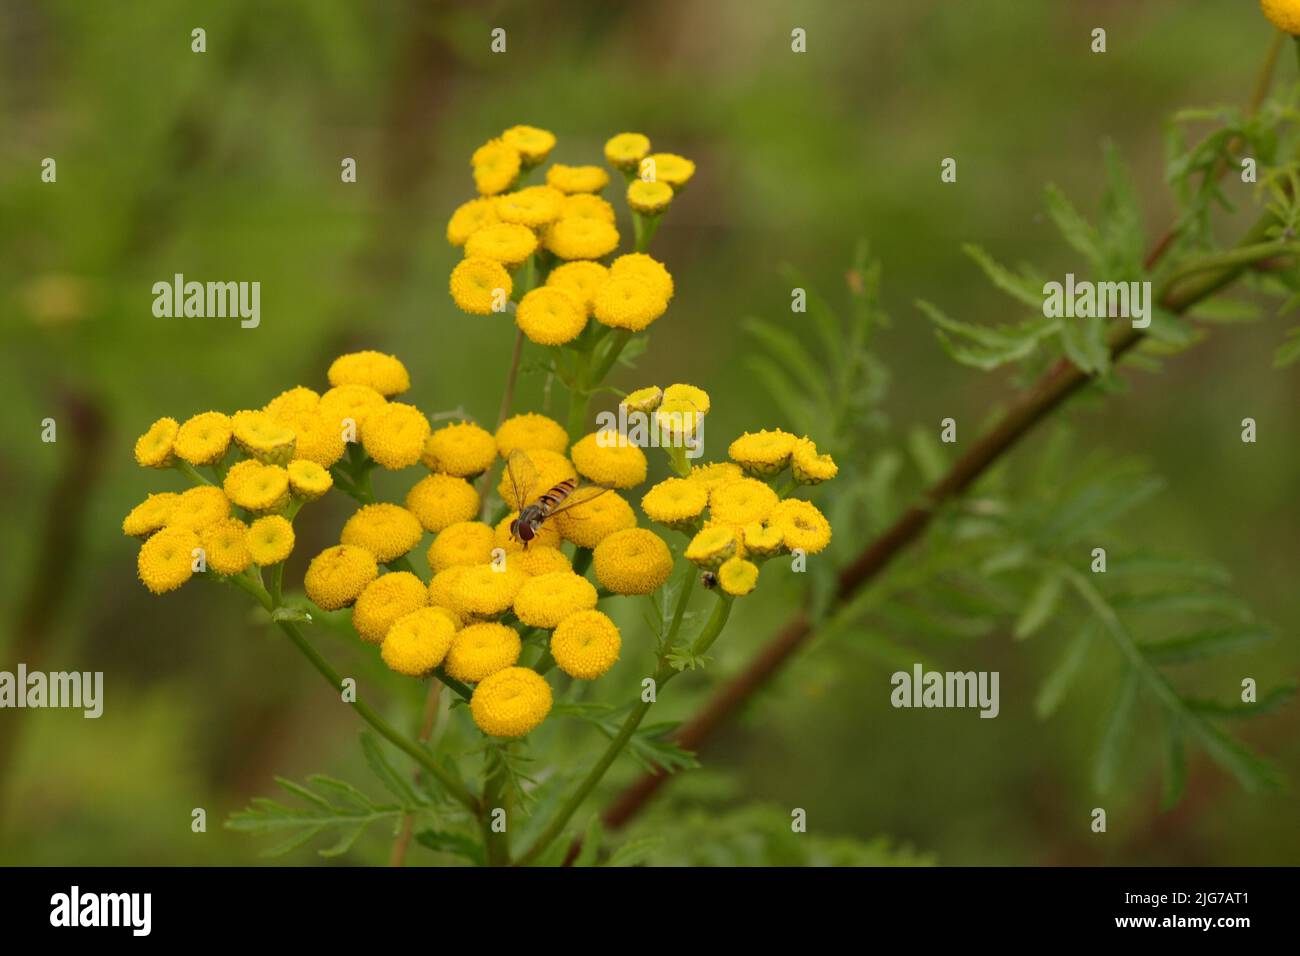 Tansy (Tanacetum vulgare) with hoverfly (Syrphidae) in the Kuehkopf, Stockstadt, Hesse, Germany Stock Photo